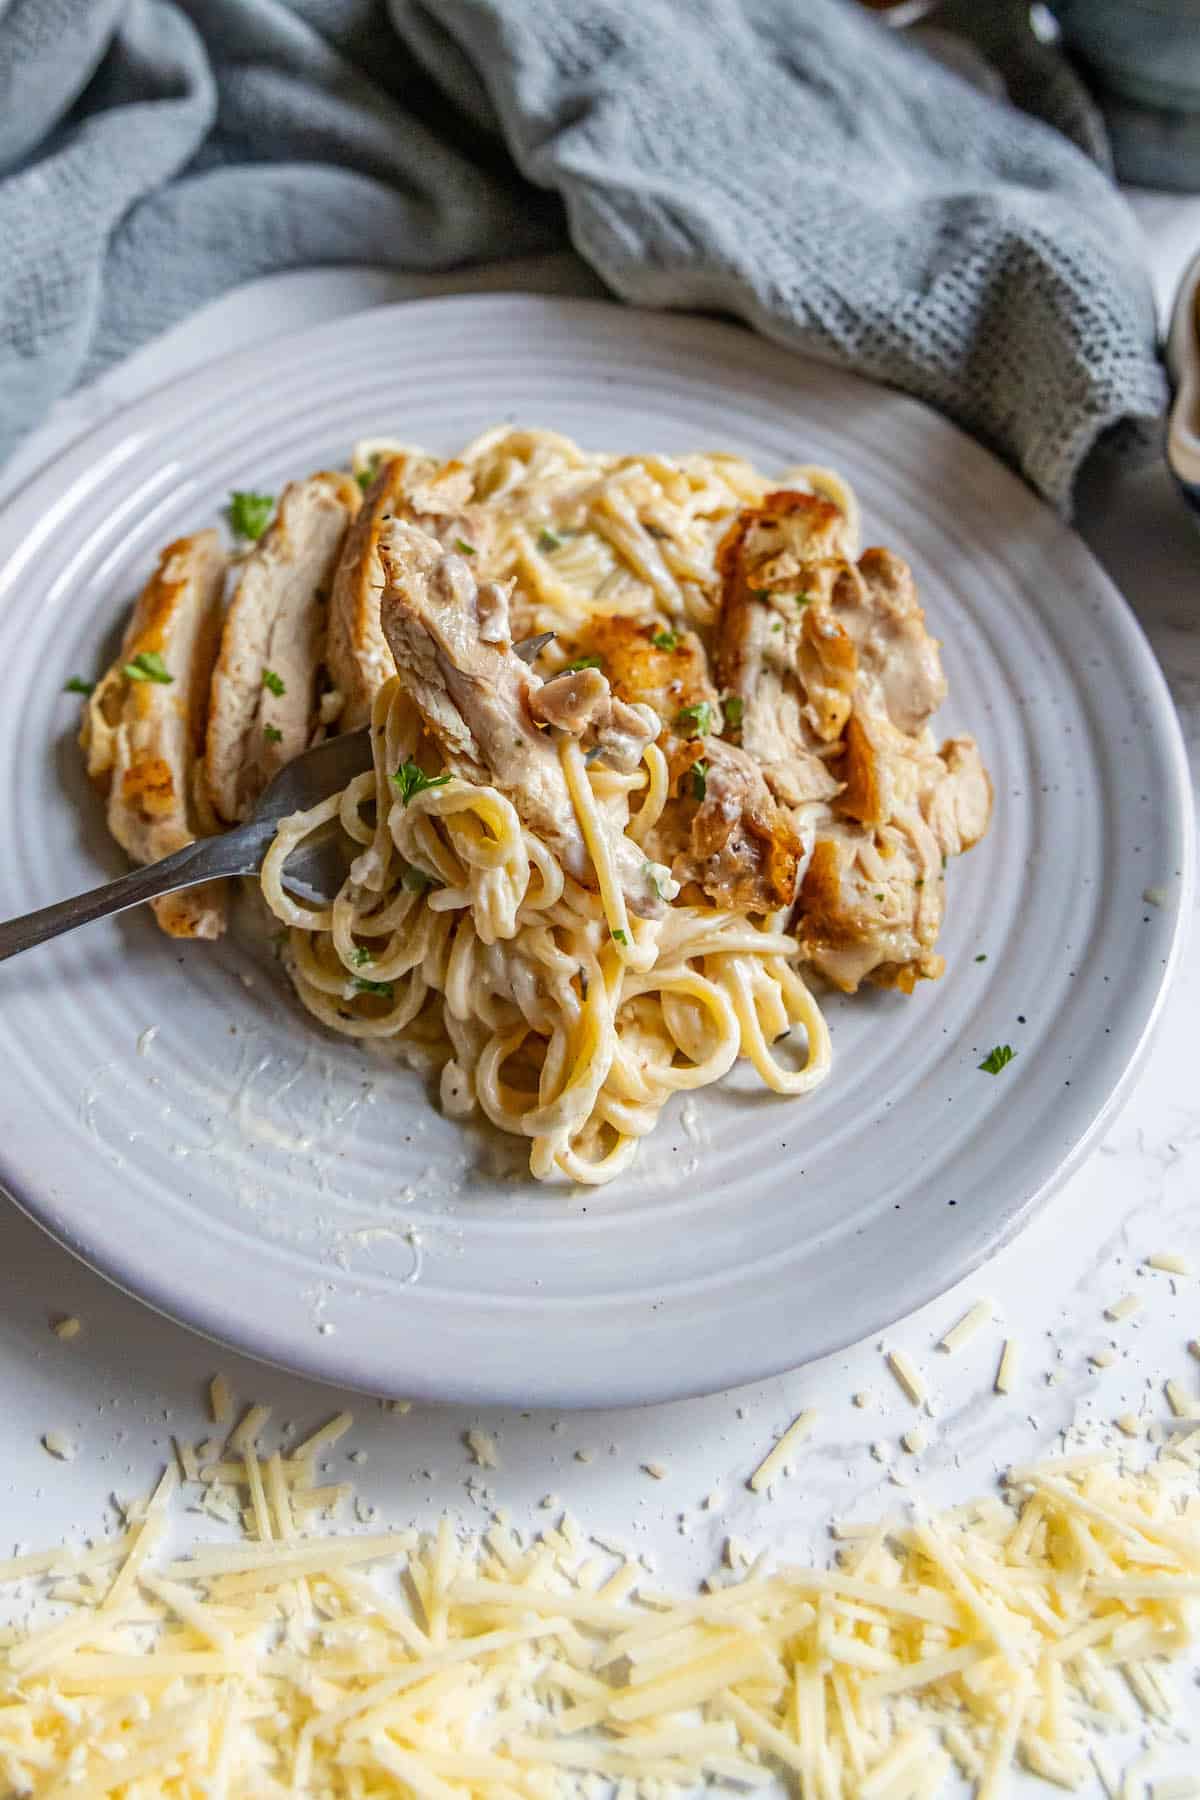 A plate of pasta with chicken and cheese on it.